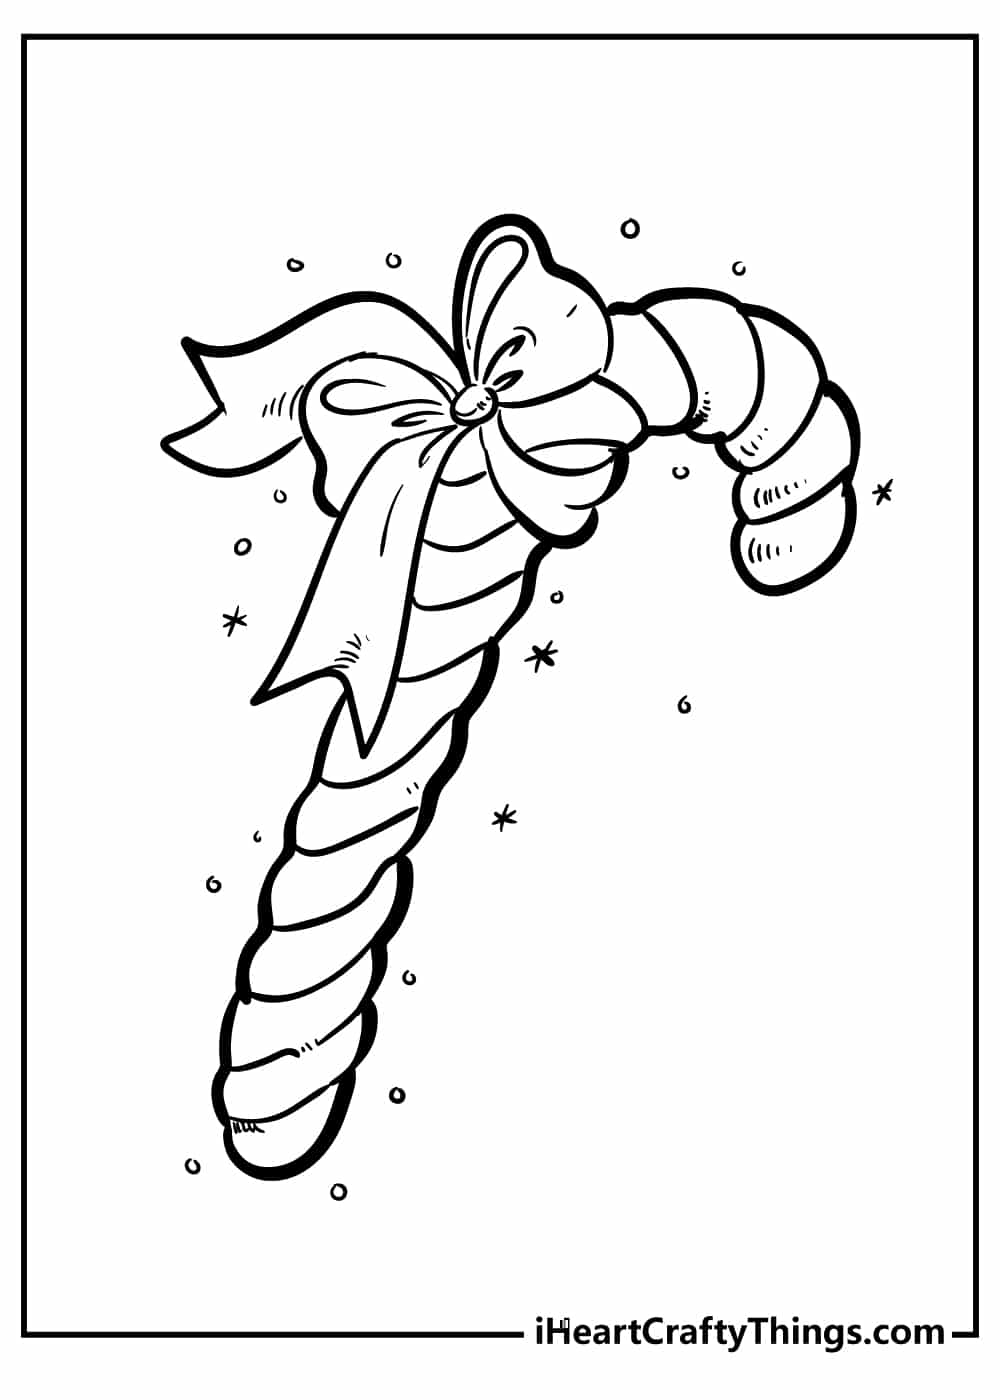 10 festive Christmas coloring pages